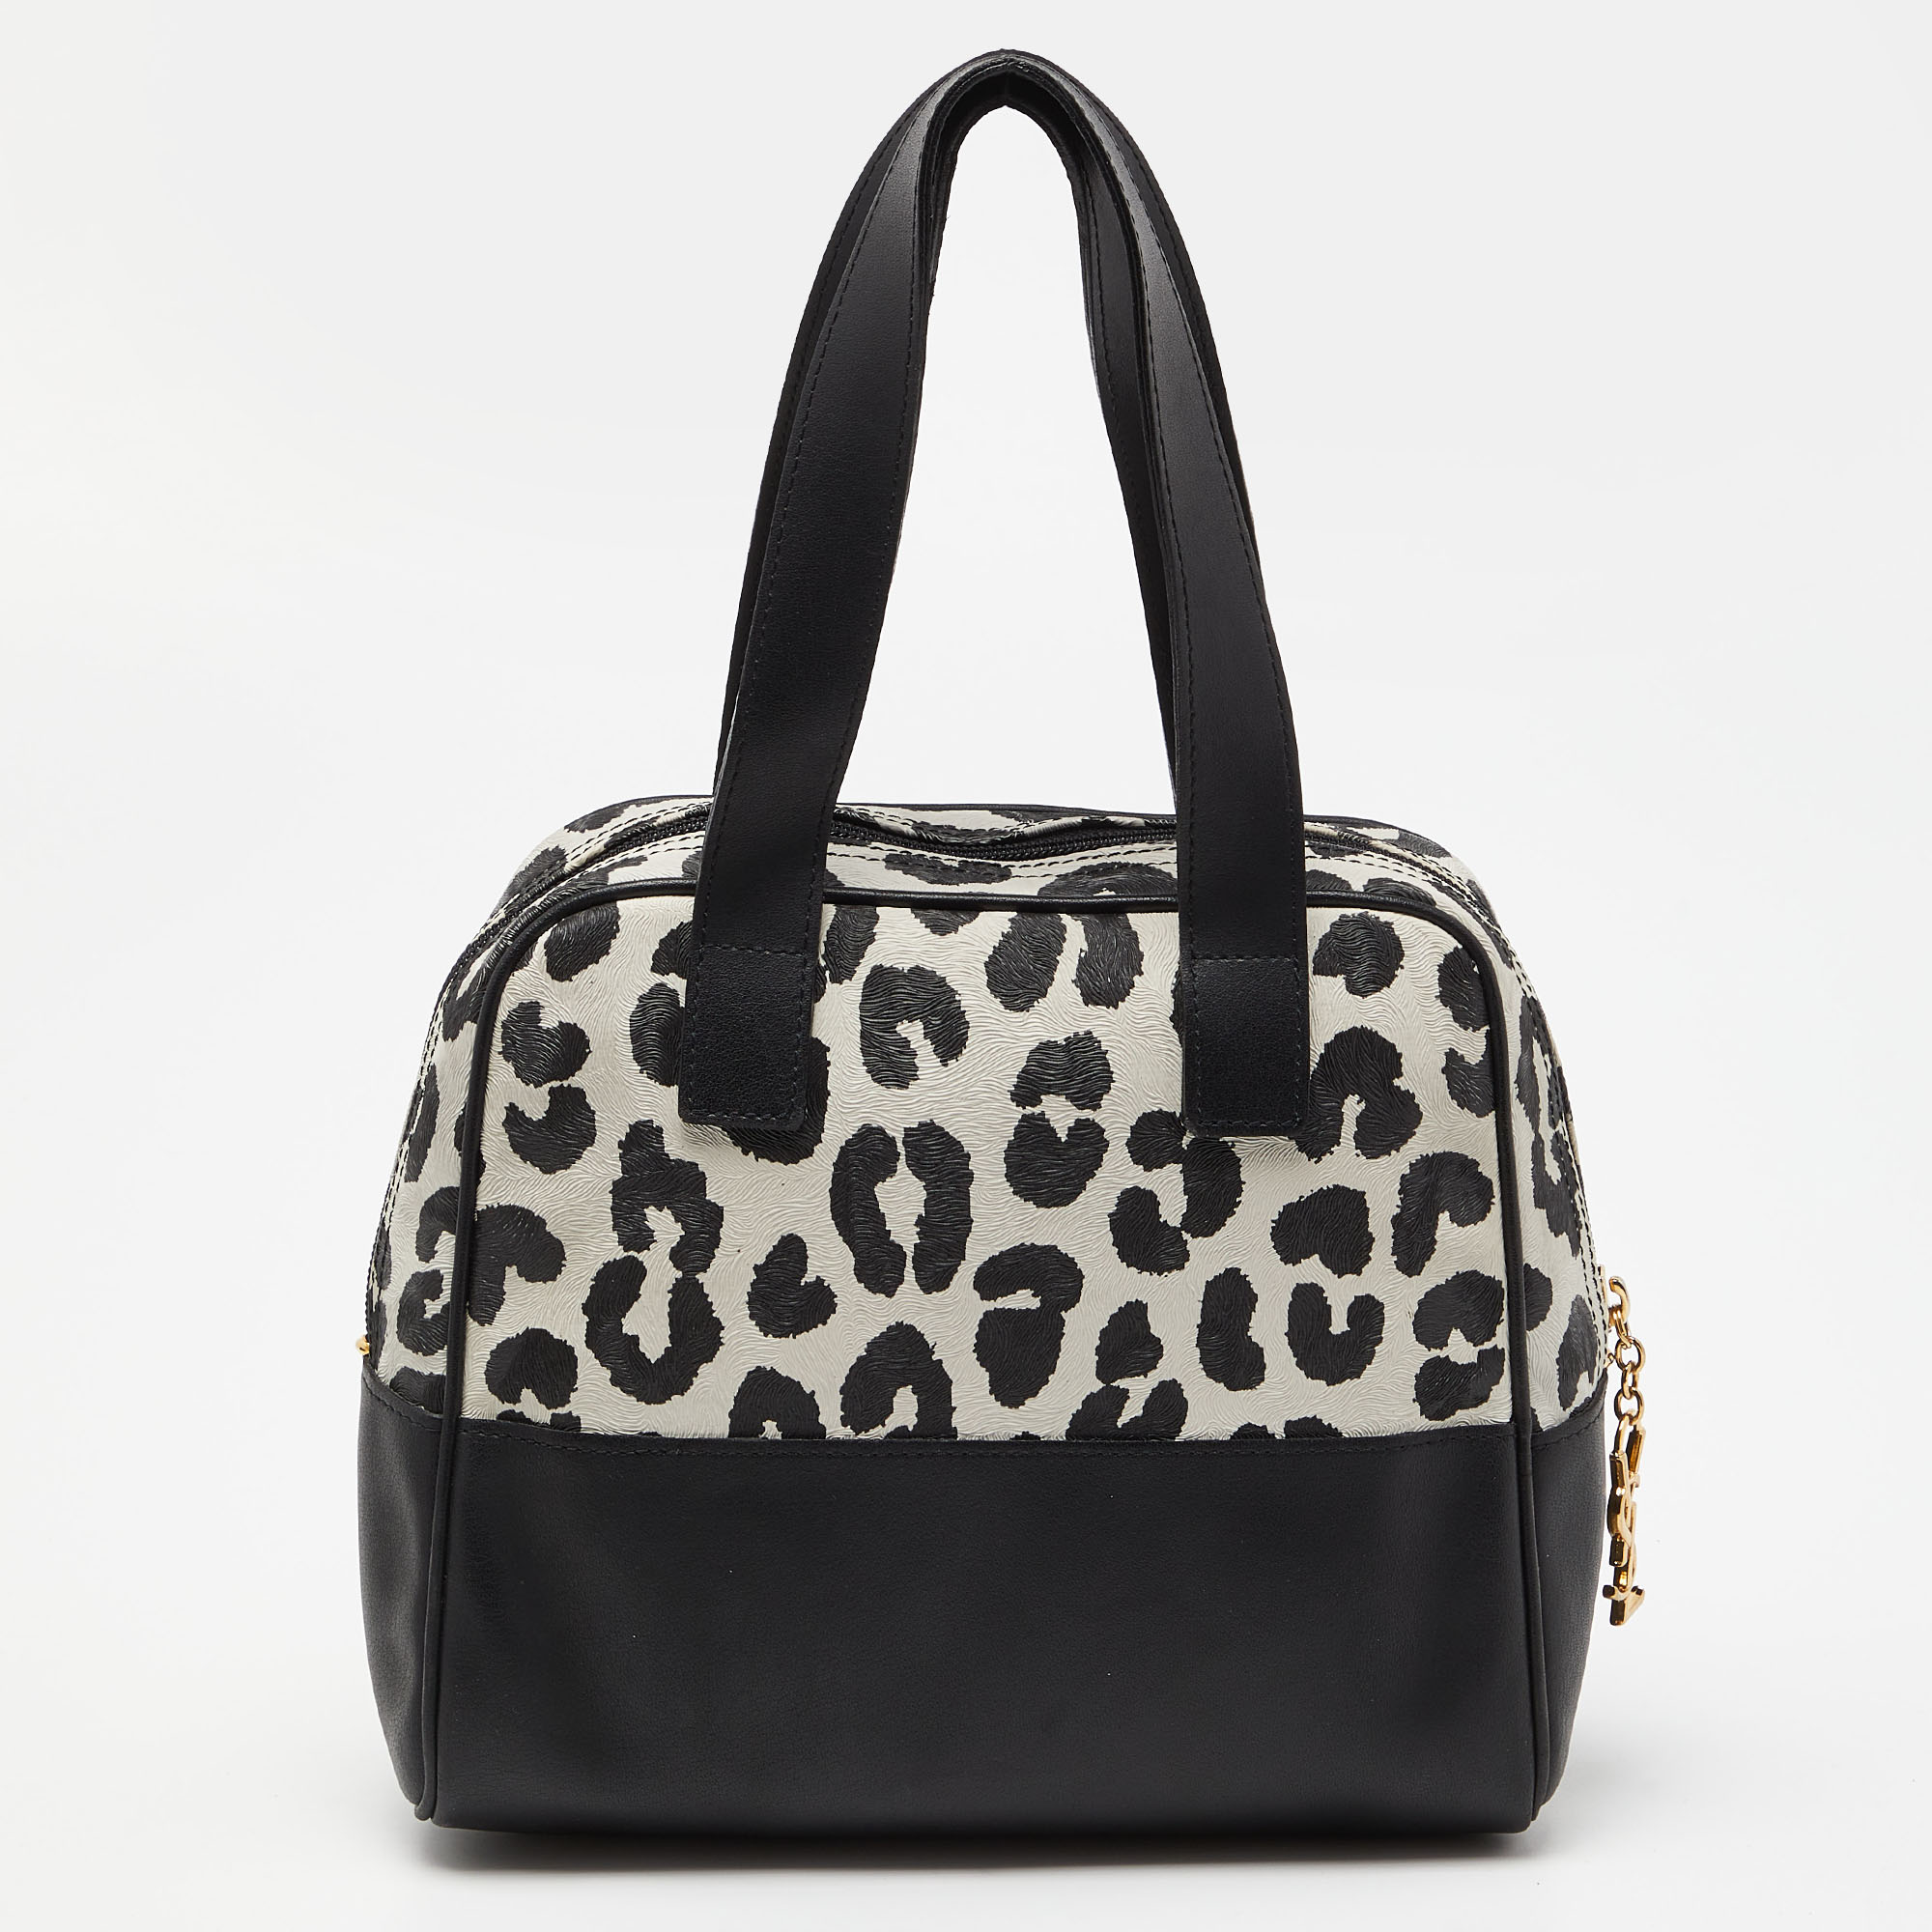 Yves Saint Laurent Black/White Leopard Print Coated Canvas And Leather Satchel